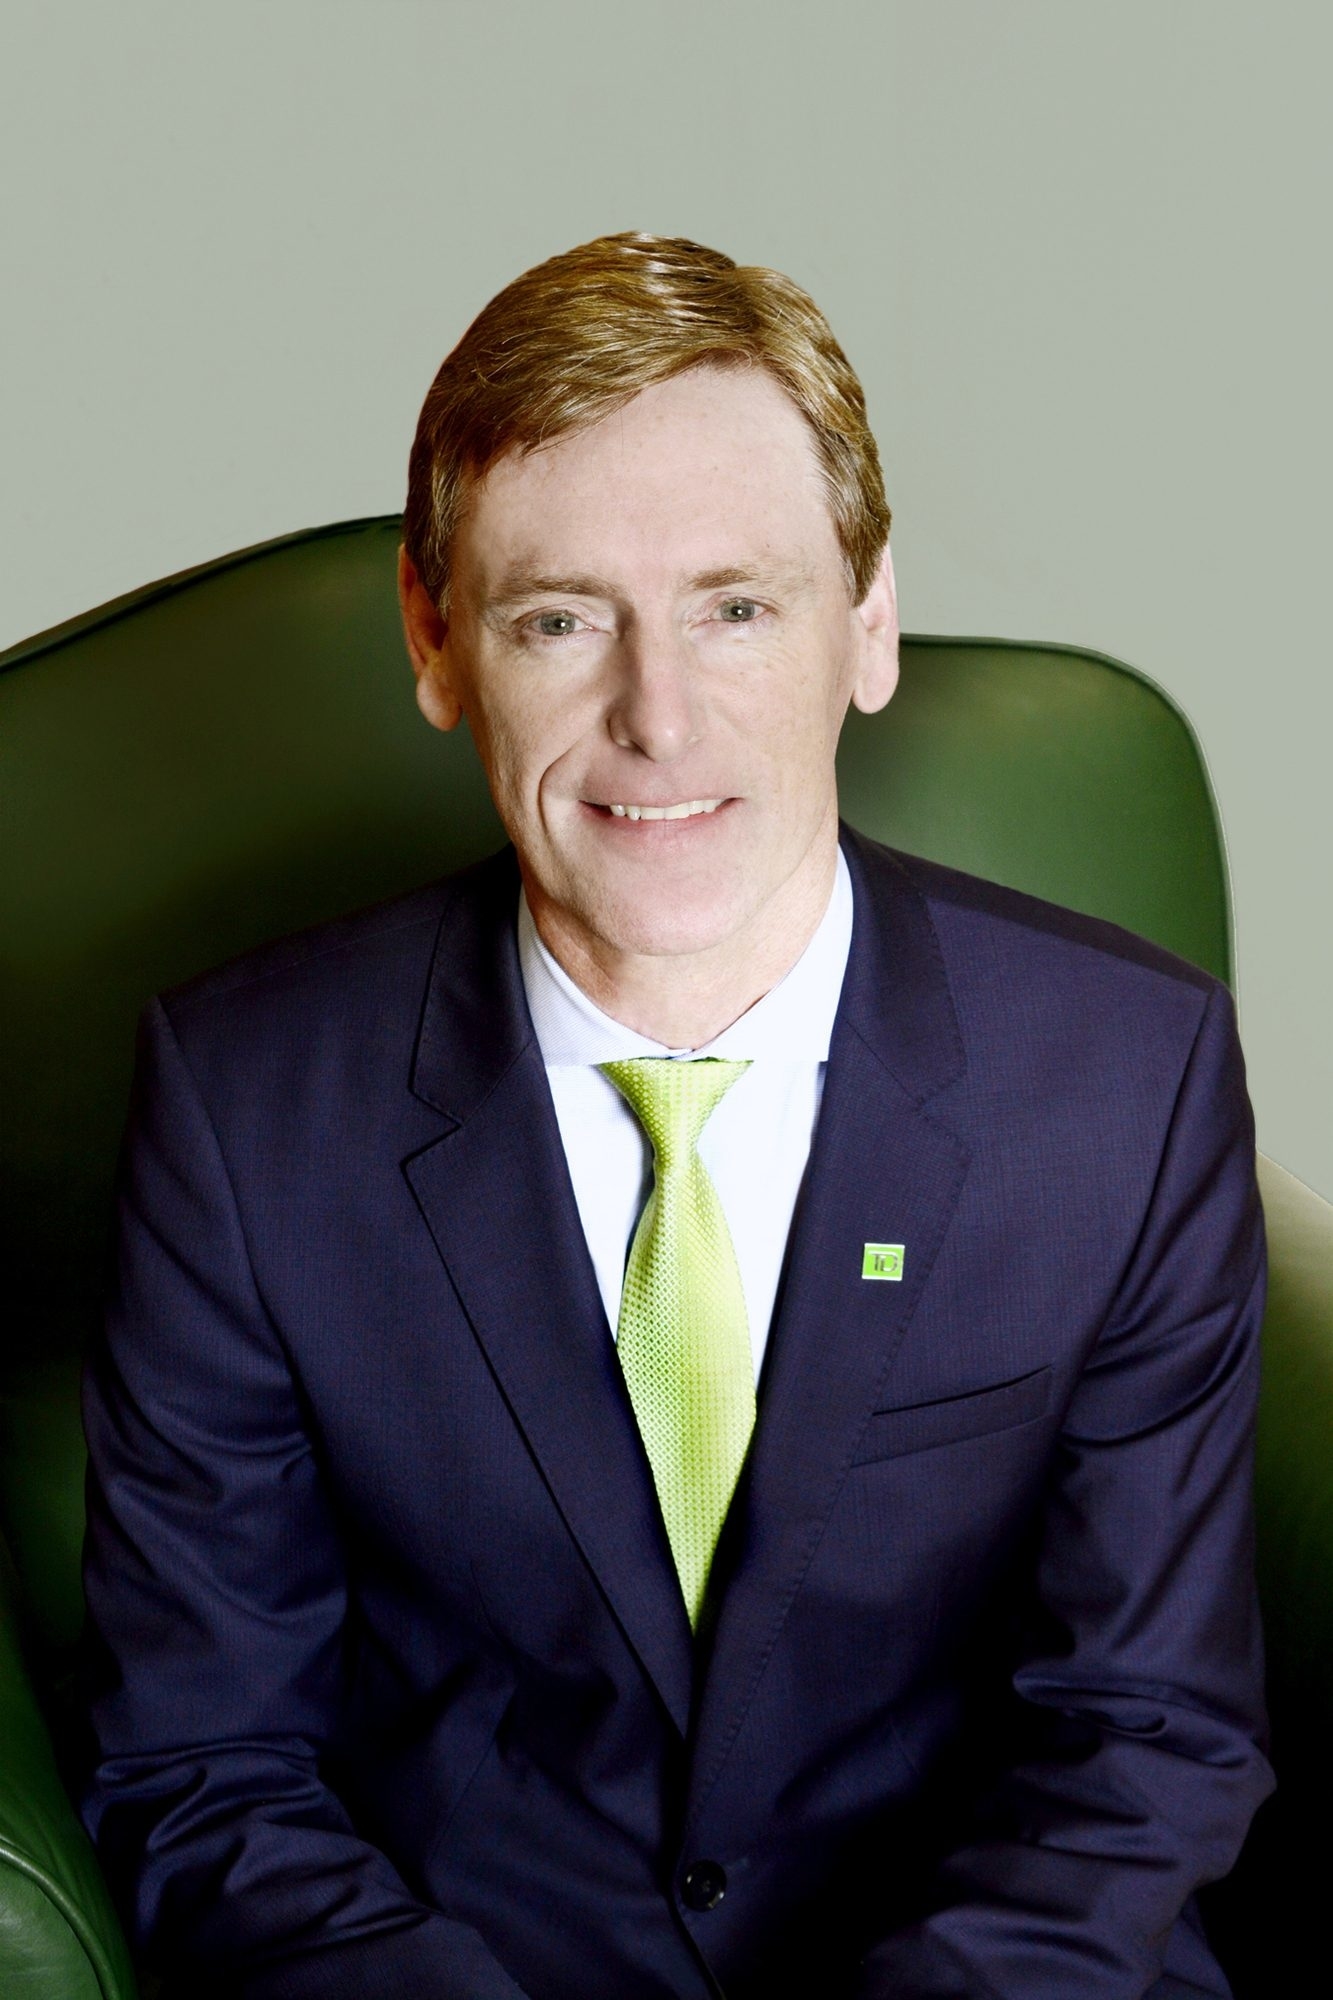 Duncan McEachran - TD Wealth Private Investment Advice - Investment Advisory Services